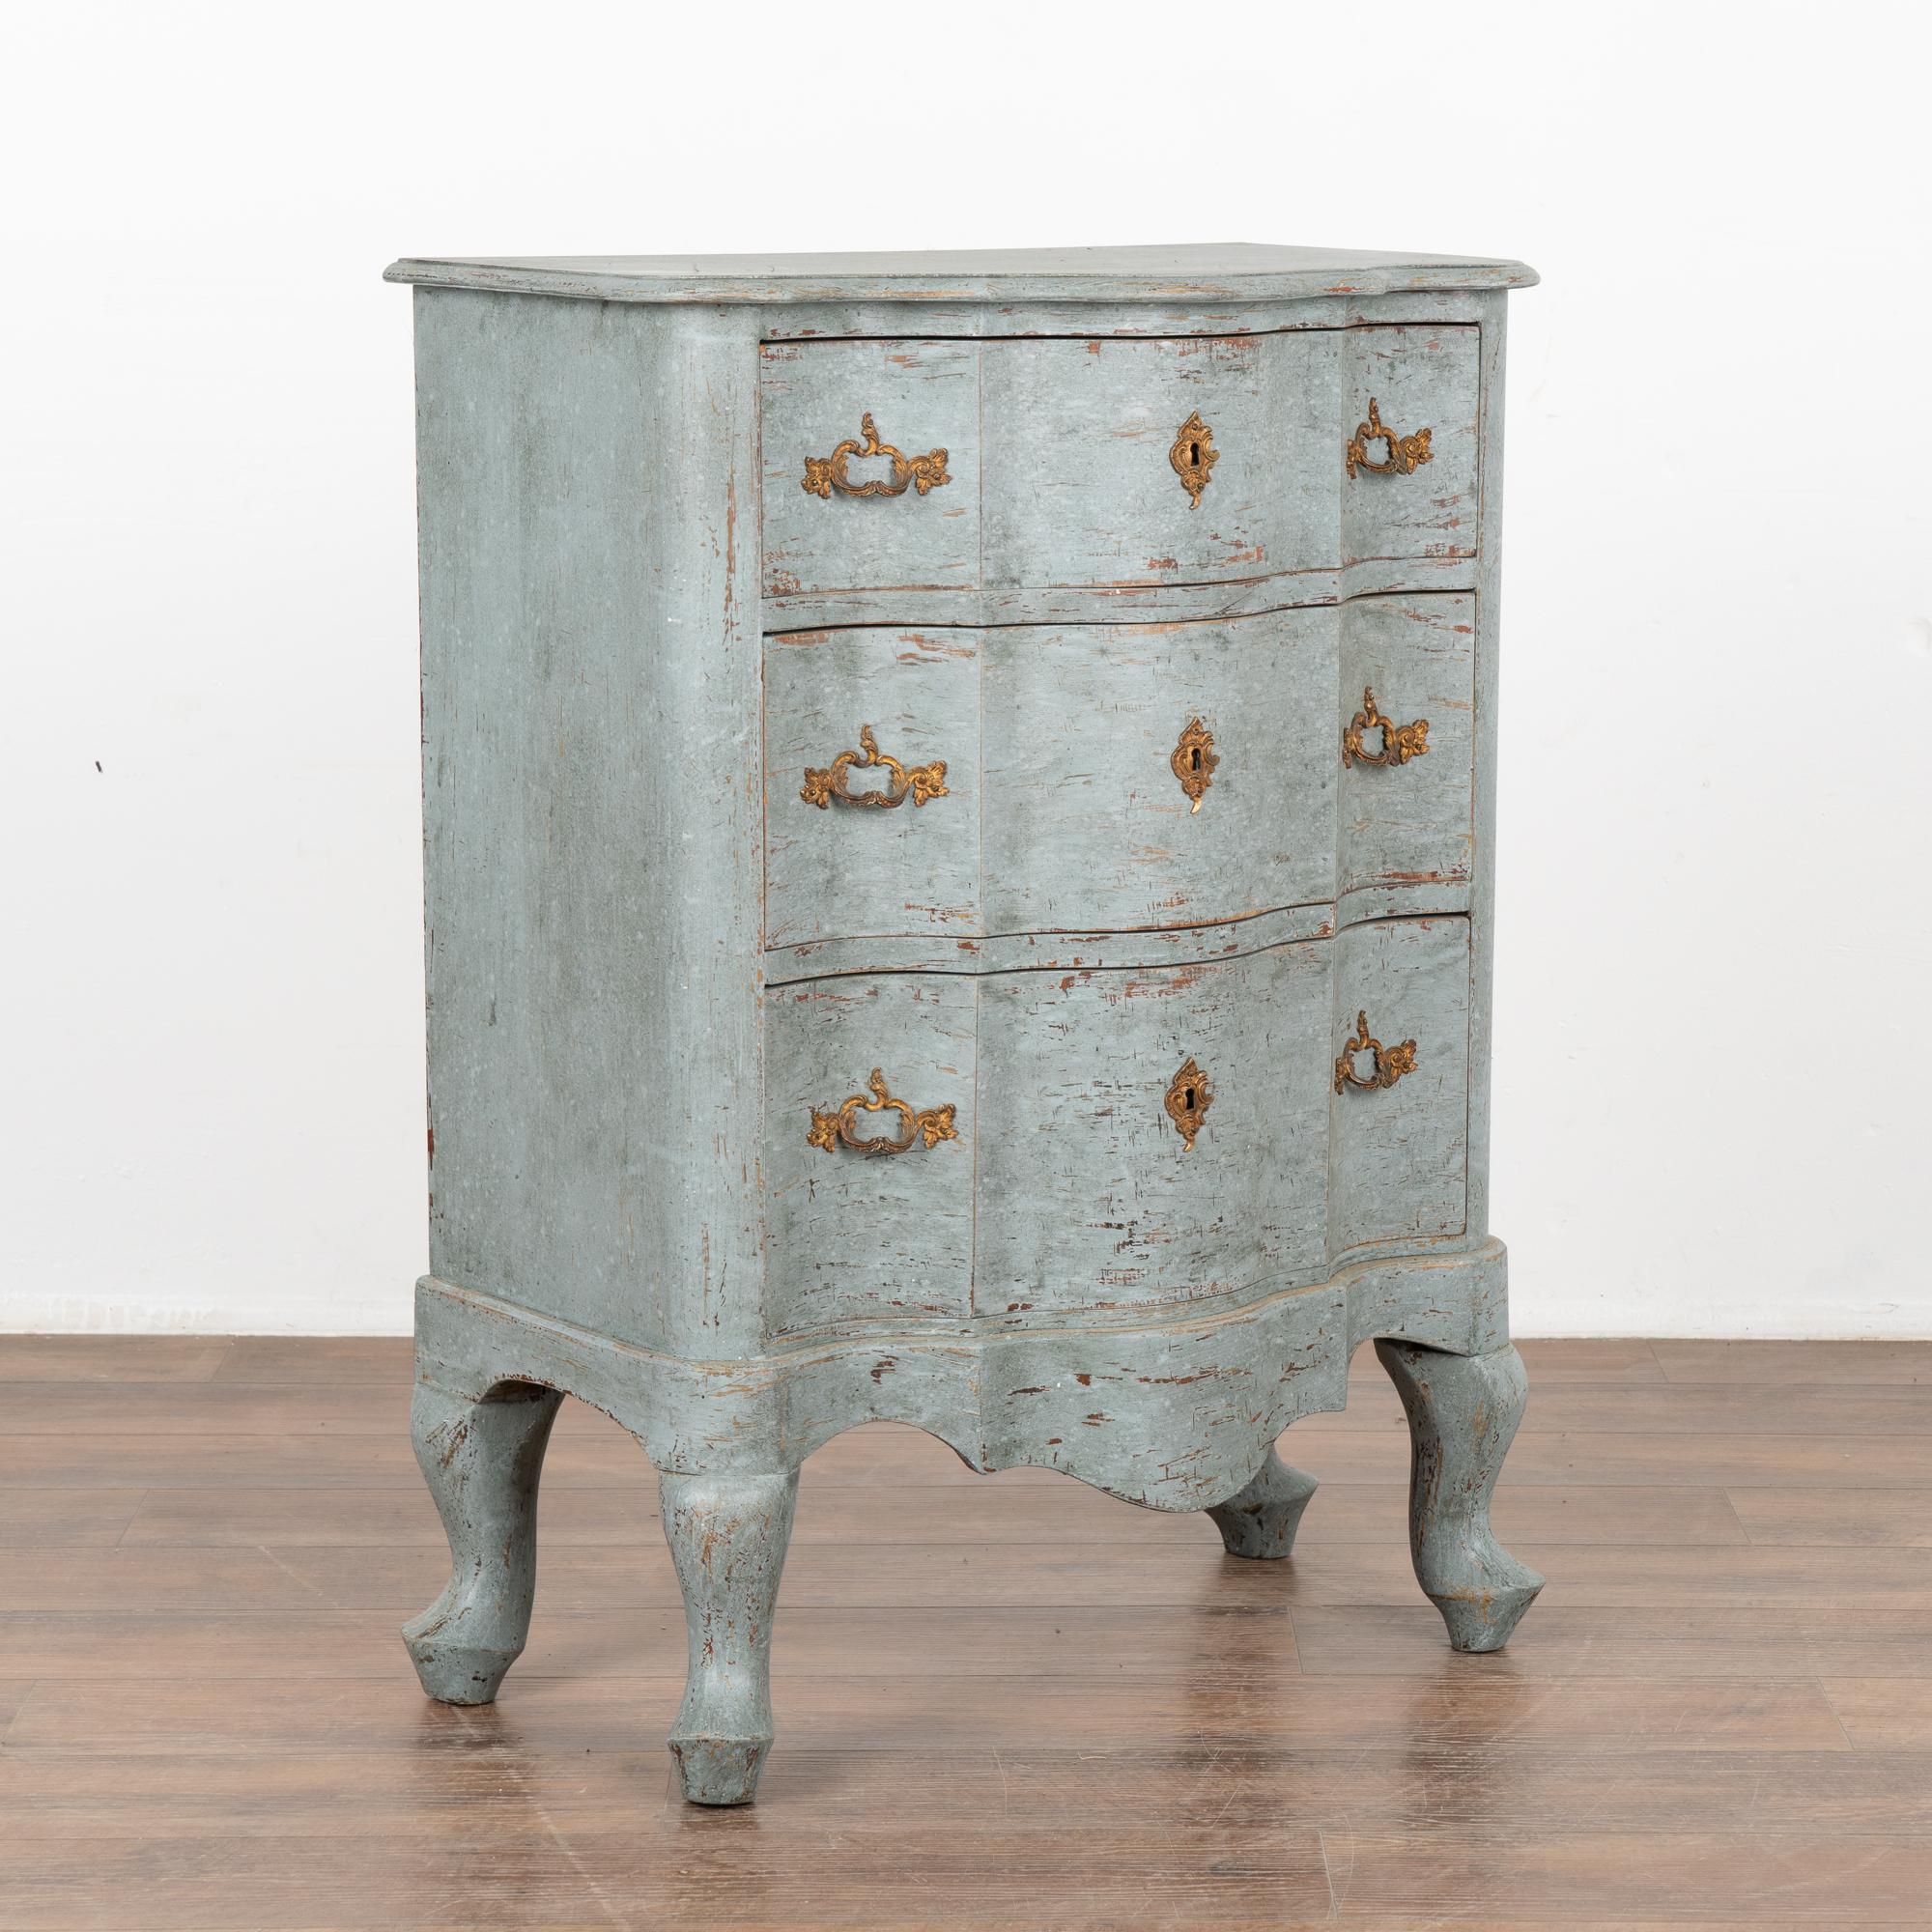 A small pine rococo chest of three drawers with brass key escutcheons. The scalloped edge is carried down through the 3 drawer fronts and bottom apron resulting in an elegant chest all resting on four cabriole legs.
The newer, professionally applied